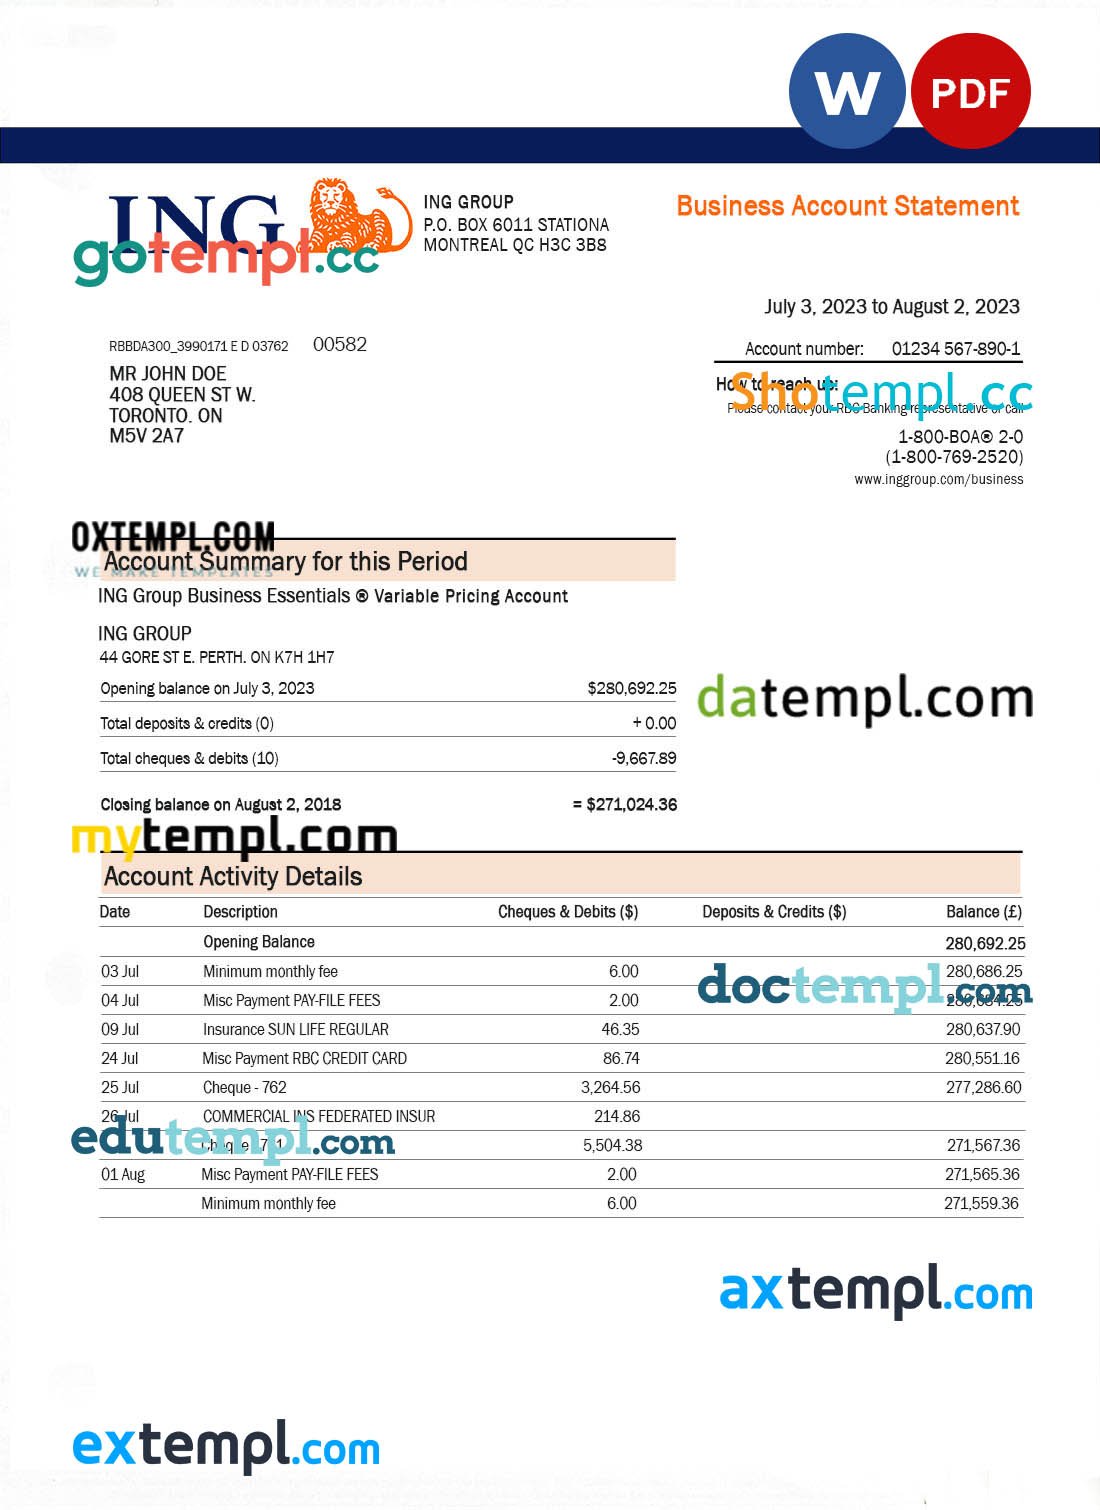 ING Group bank company account statement Word and PDF template